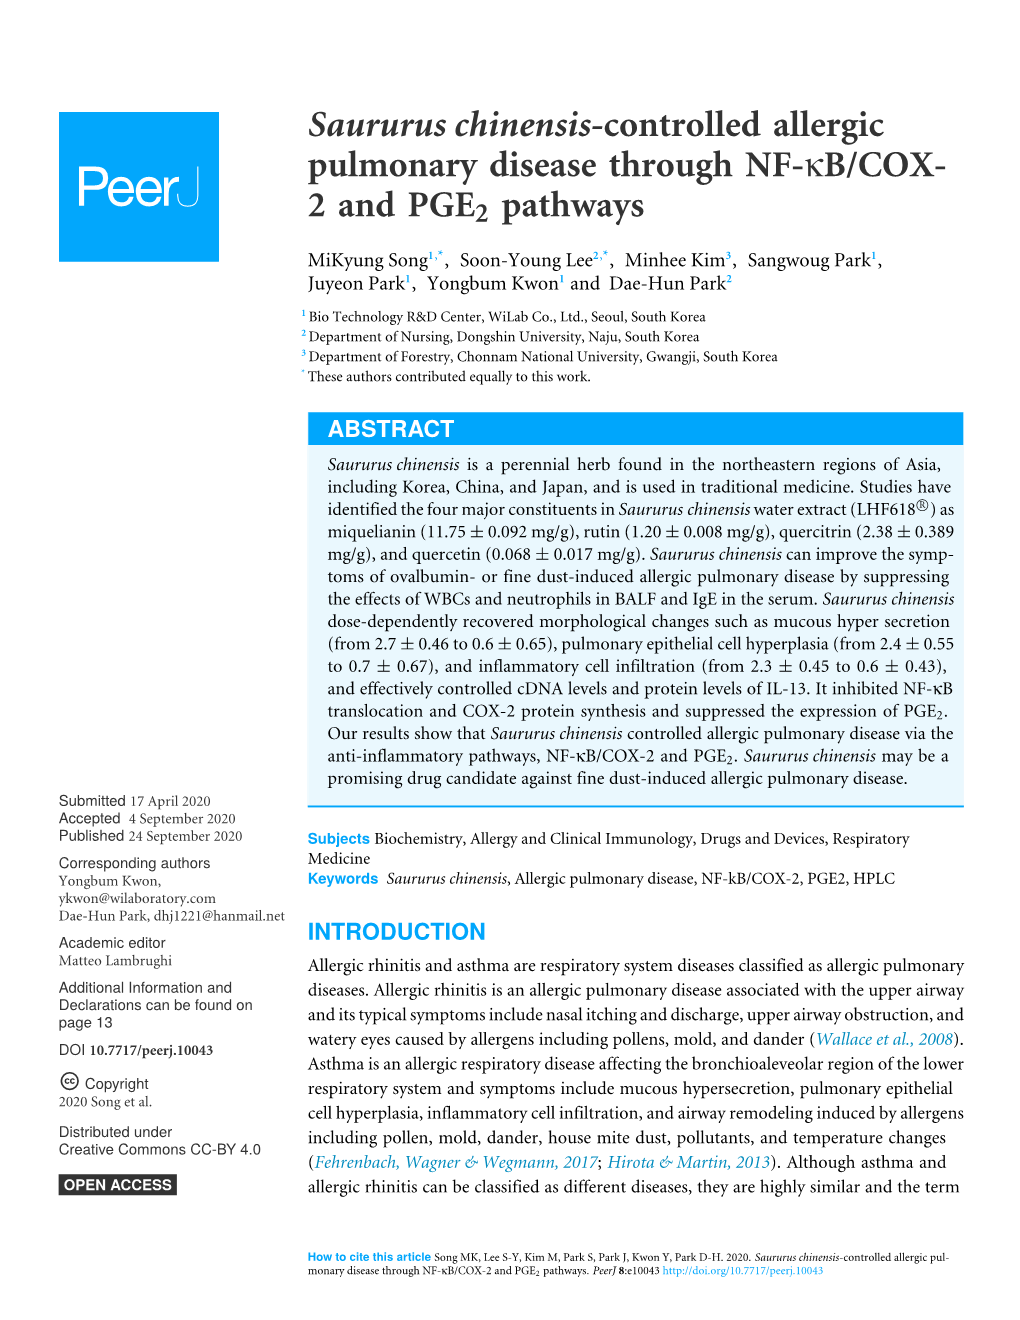 Saururus Chinensis-Controlled Allergic Pulmonary Disease Through NF-Κb/COX- 2 and PGE2 Pathways